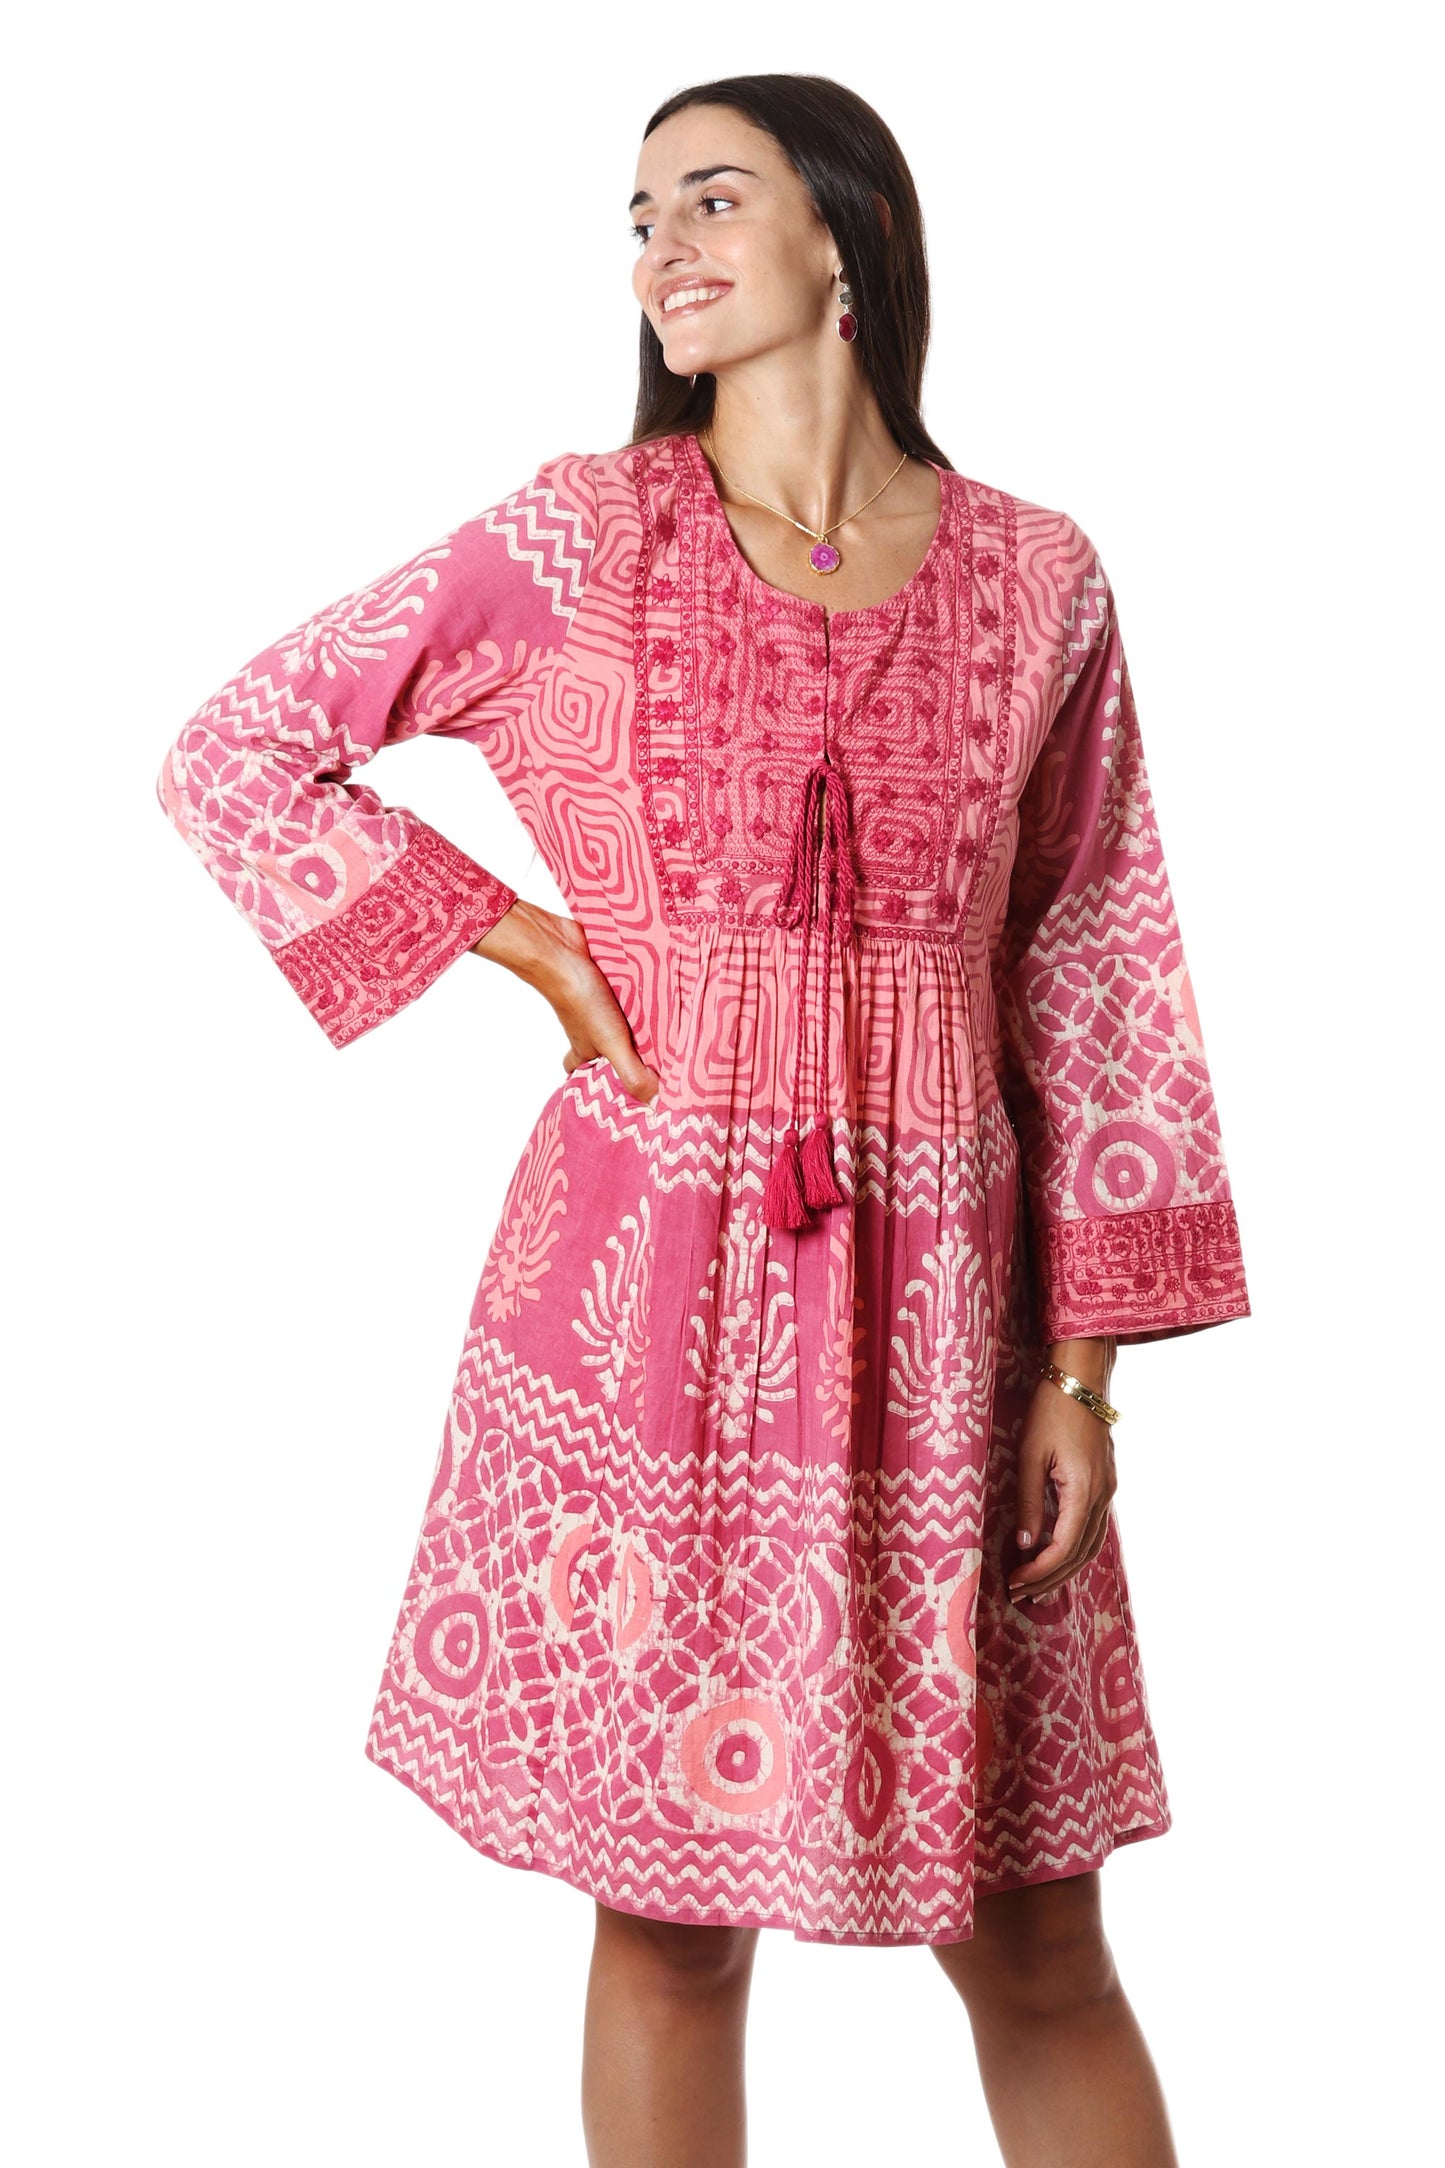 Petal Pink Embroidered Cotton A-Line Dress from India